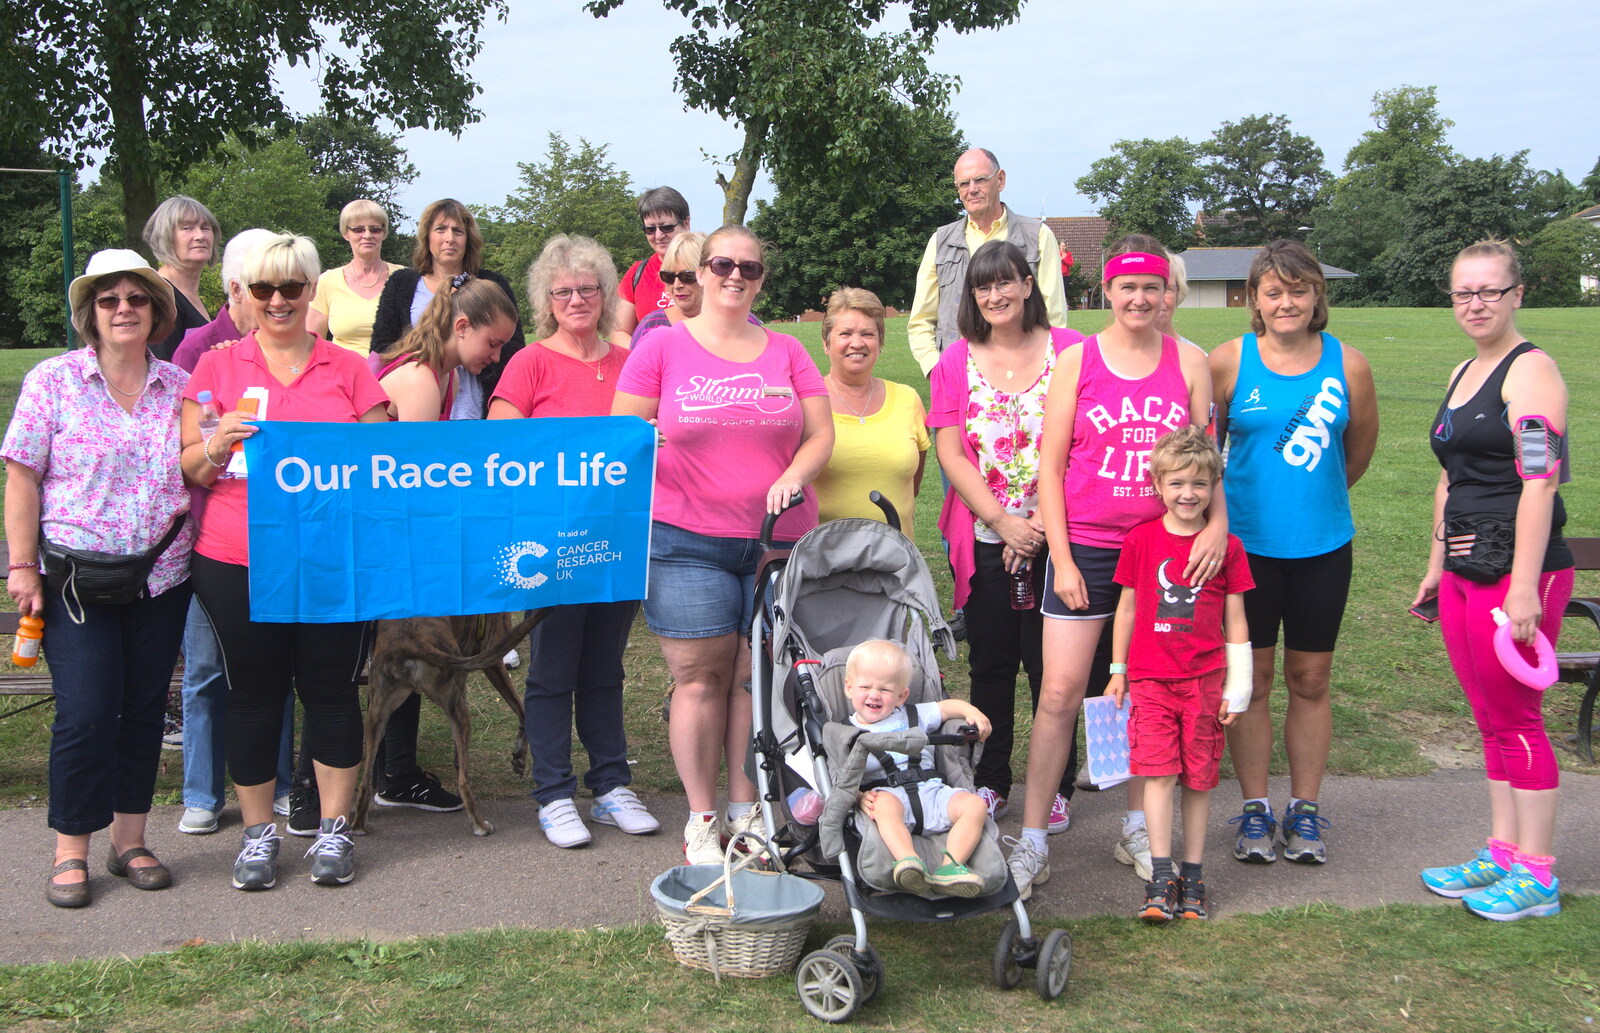 The Slimming World runners and supporters from A Race For Life, The Park, Diss, Norfolk - 16th August 2015